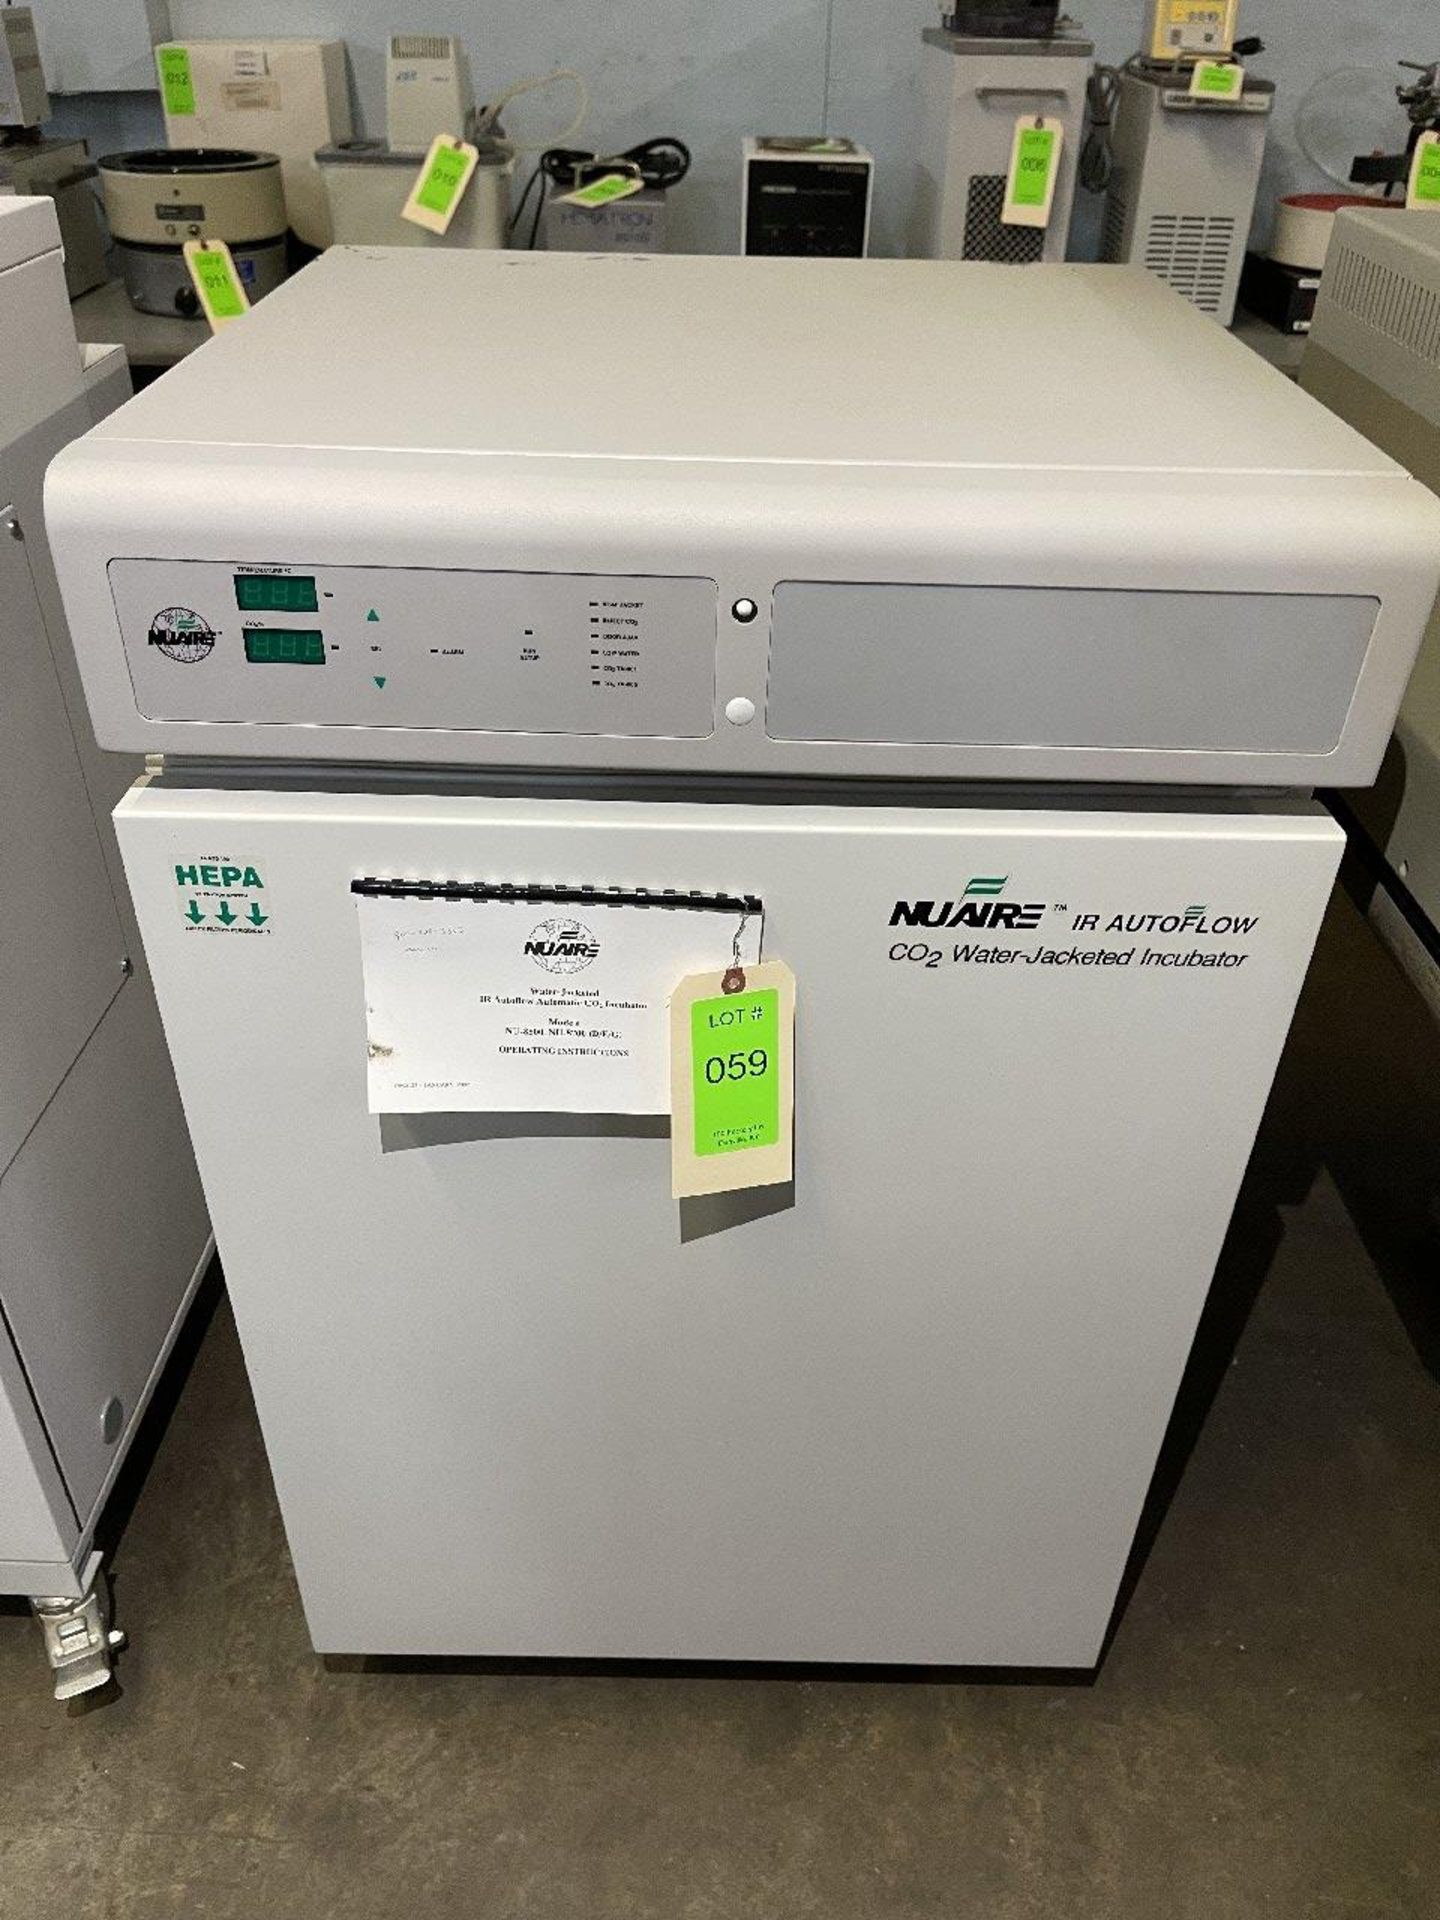 Nuaire IR Auto Flow CO2 Water-Jacketed Incubator